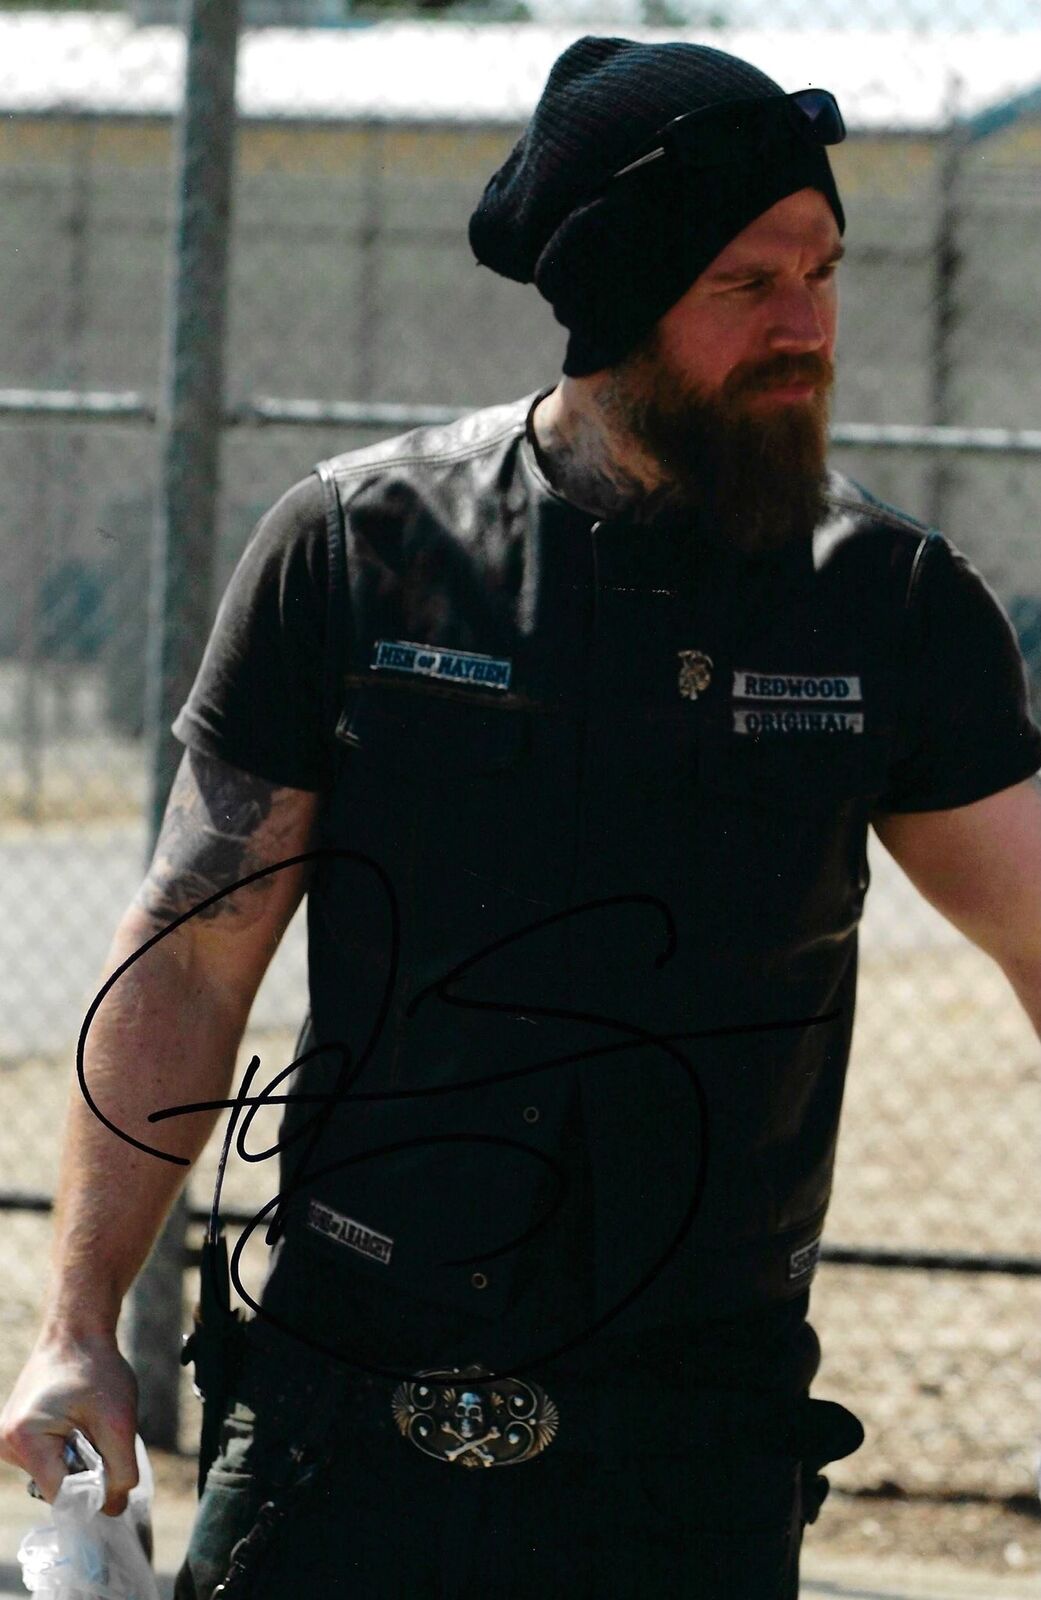 RYAN HURST SIGNED OPIE SONS OF ANARCHY 12x8 PHOTO (AFTAL COA)